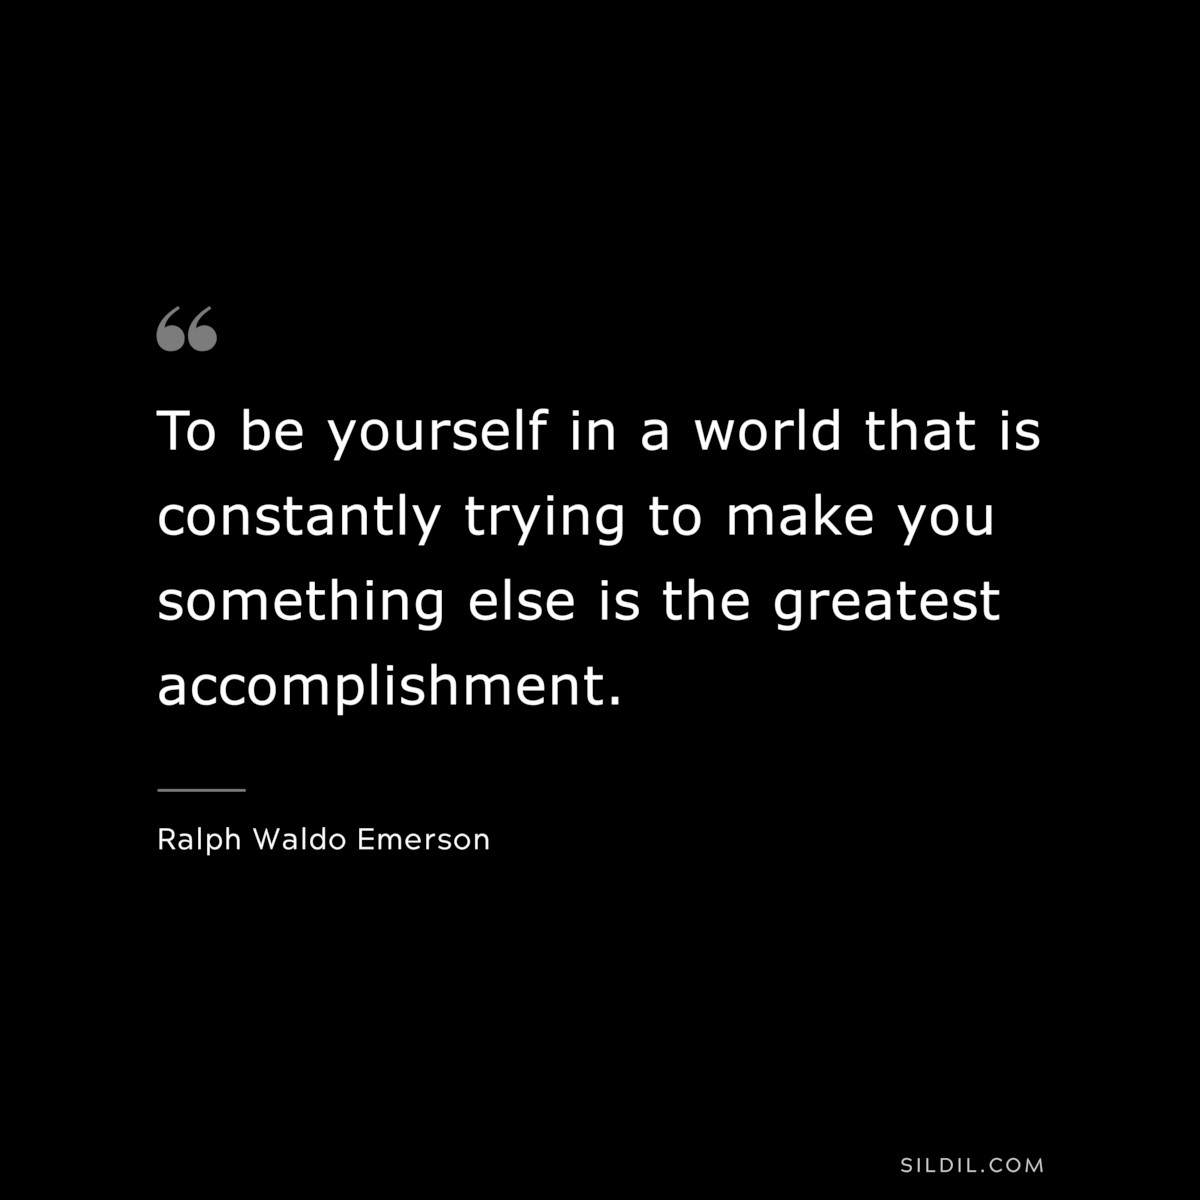 To be yourself in a world that is constantly trying to make you something else is the greatest accomplishment. ― Ralph Waldo Emerson